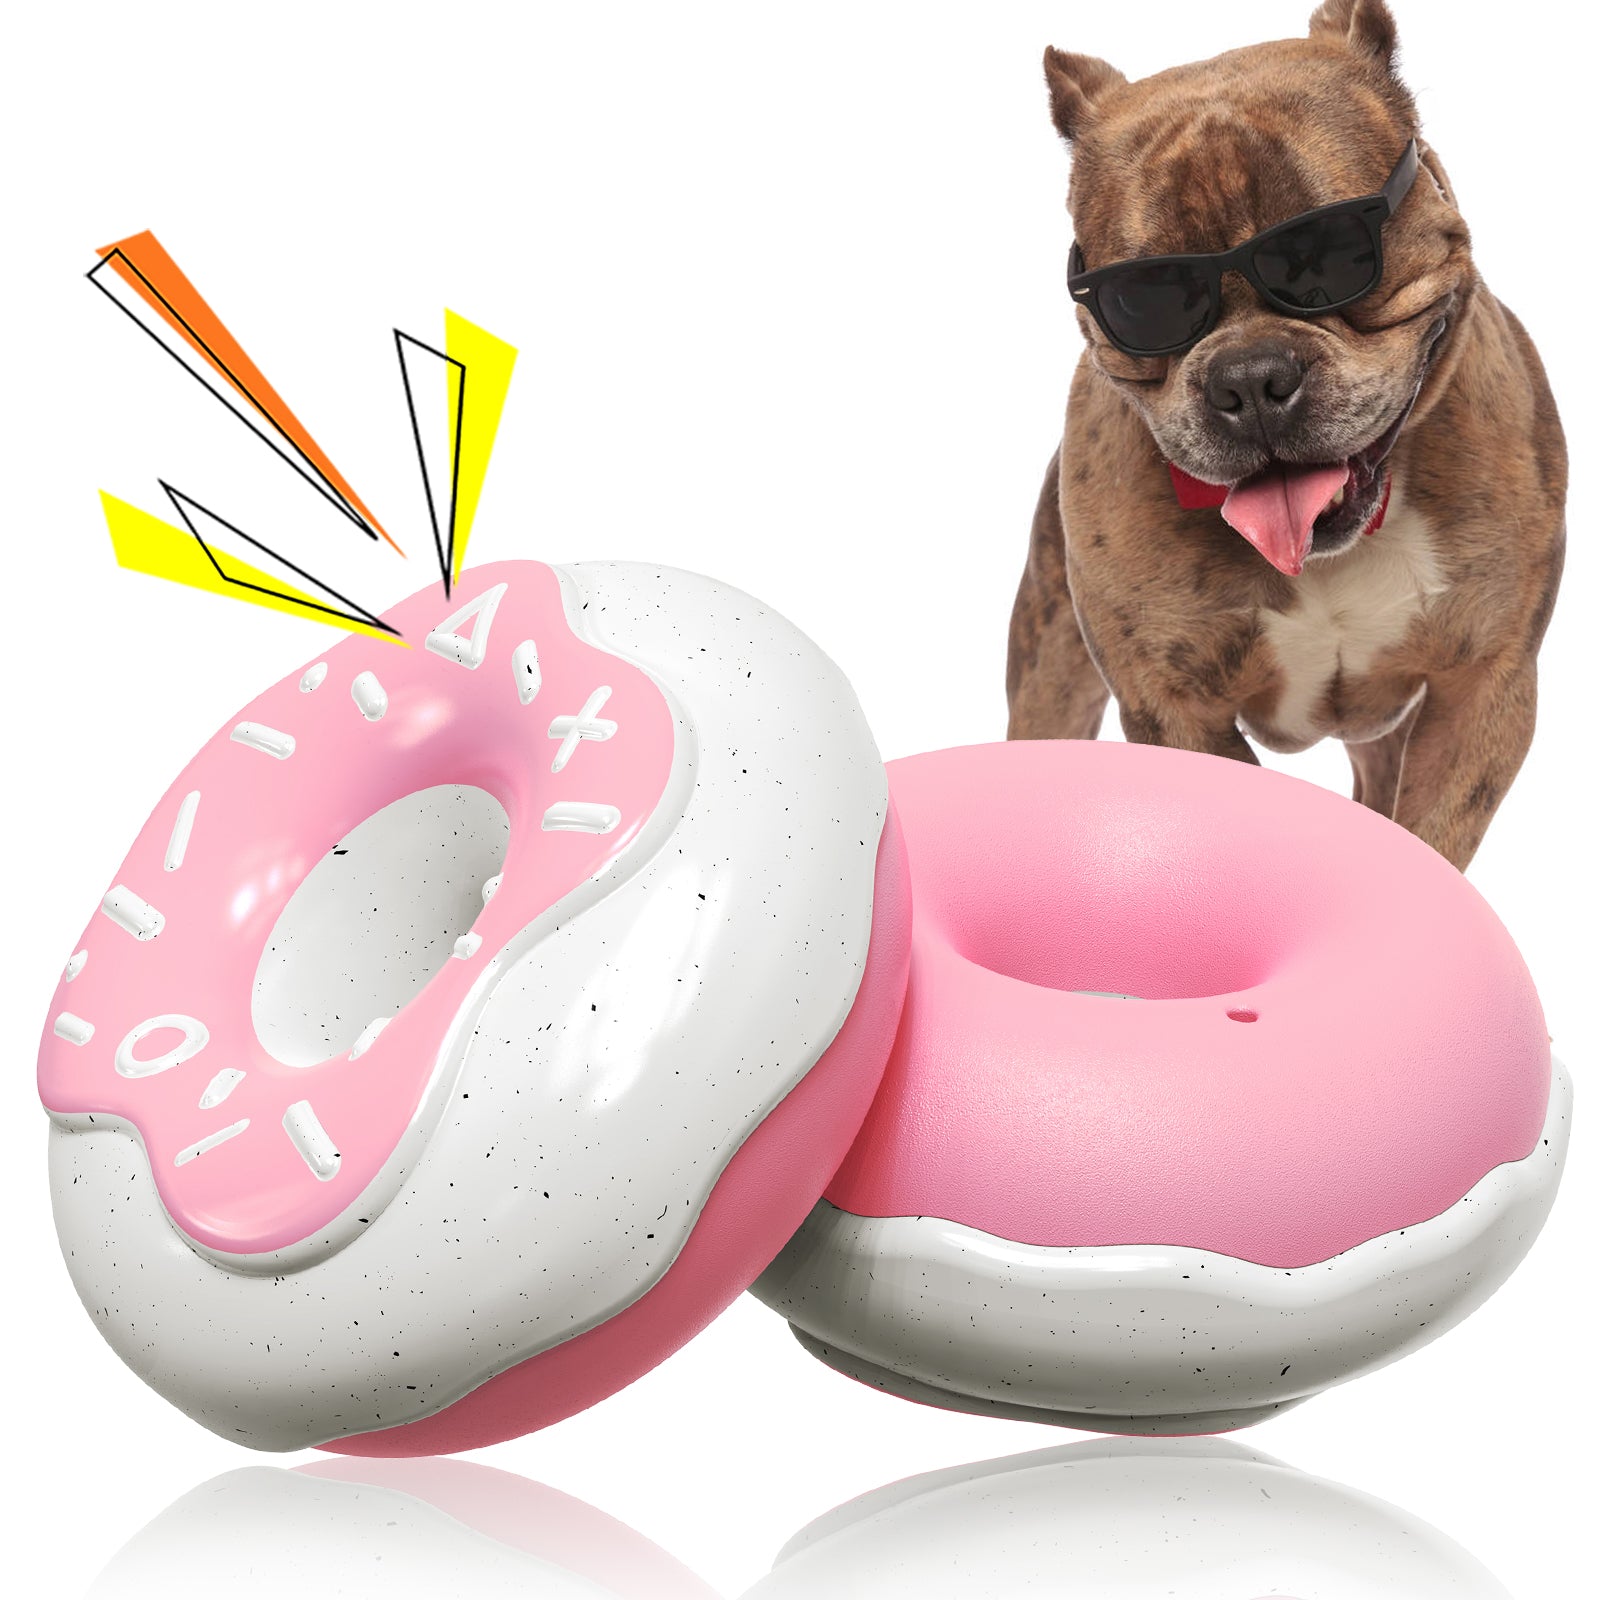 Dog Puzzle Feeder Toy for Beginners, Durable Puppy Treats Dispenser Interactive  Toys Slow Feeding, Cat Brain Games Training for Boredom, Improving IQ, Pink  